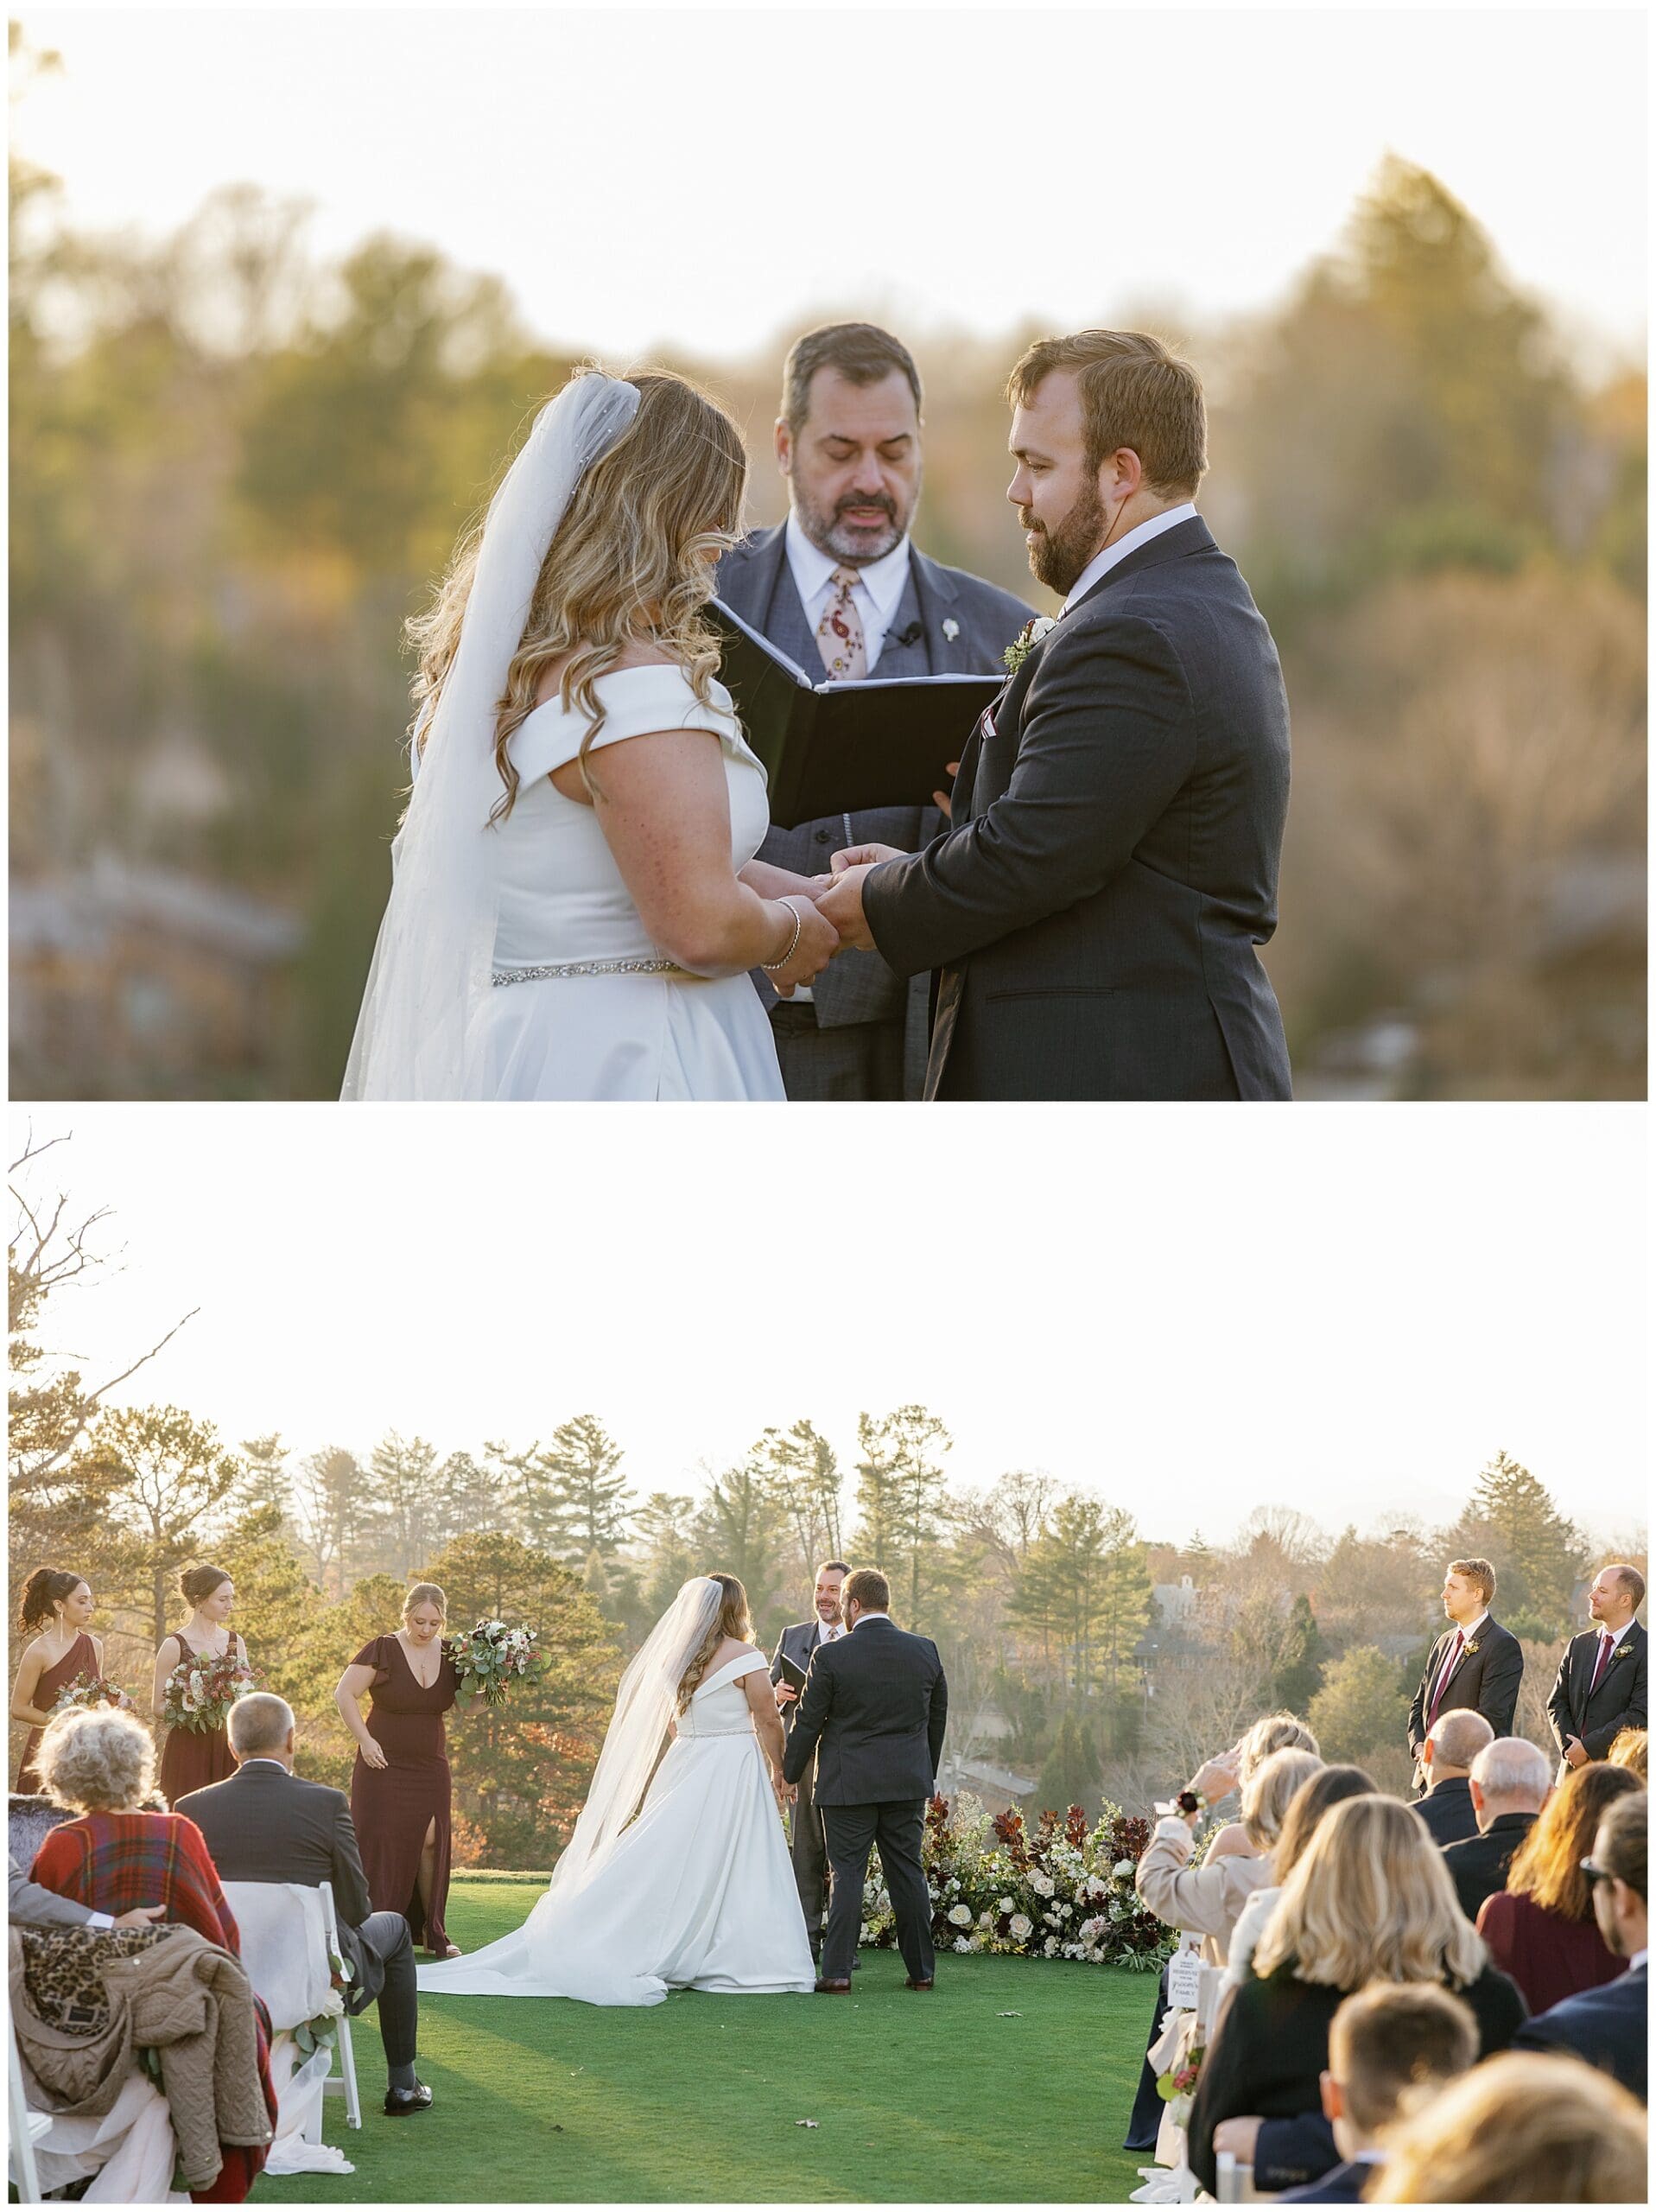 A bride and groom exchange vows in front of a golf course.